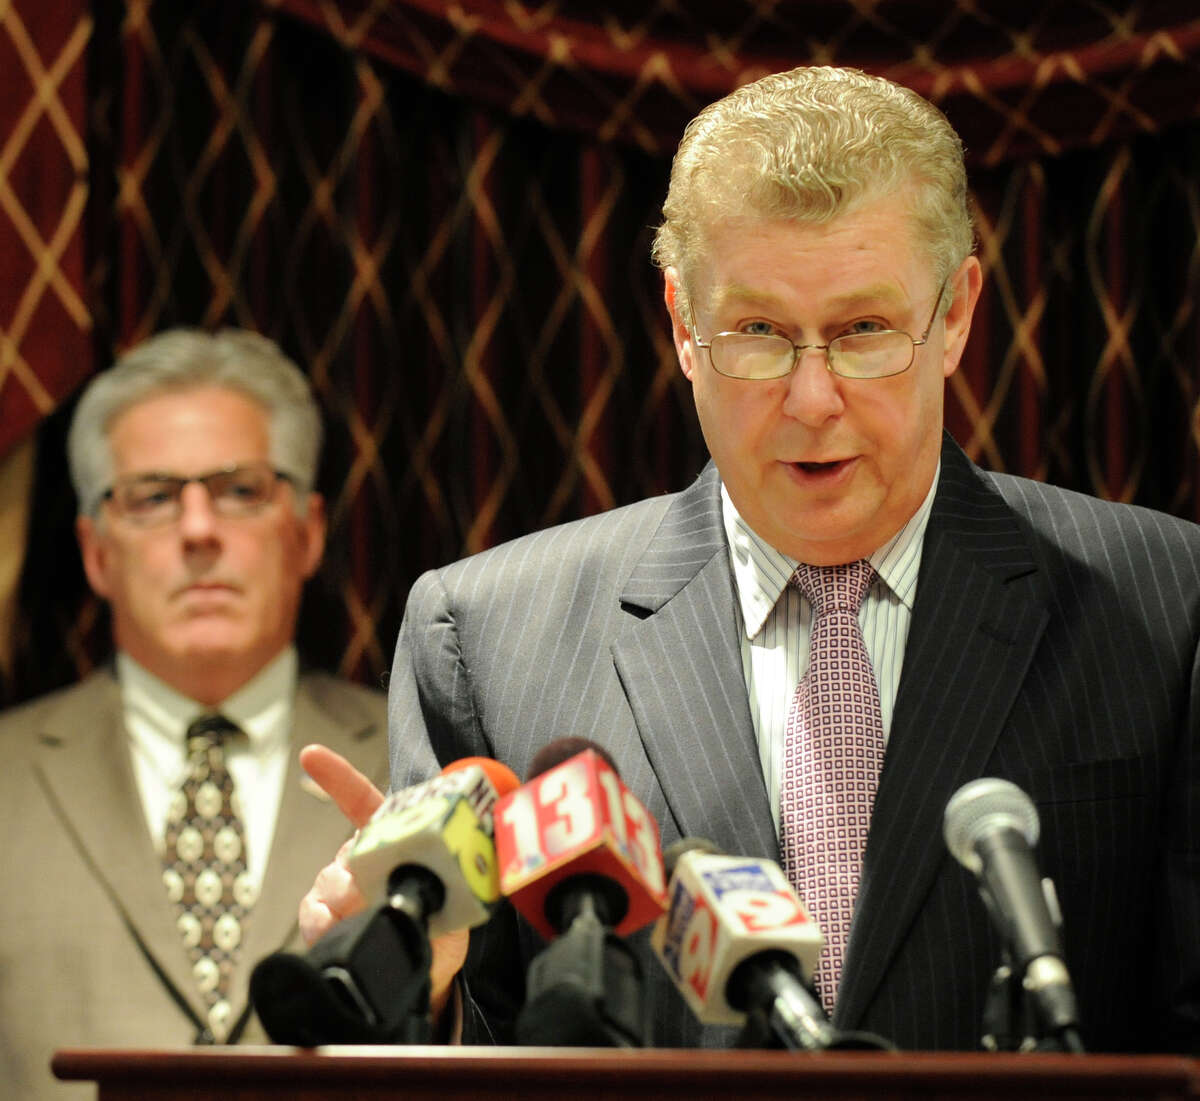 Tom Wade, Rensselaer County Democratic Party Chair(r) speaks during a press conference at the Hilton Garden Inn in Troy, New York about alleged improprieties in voting by the RENSCO Republican Party October 5, 2009. In the background is Troy City Councilman Clem "Chappy" Campana.(Skip Dickstein/Times Union)